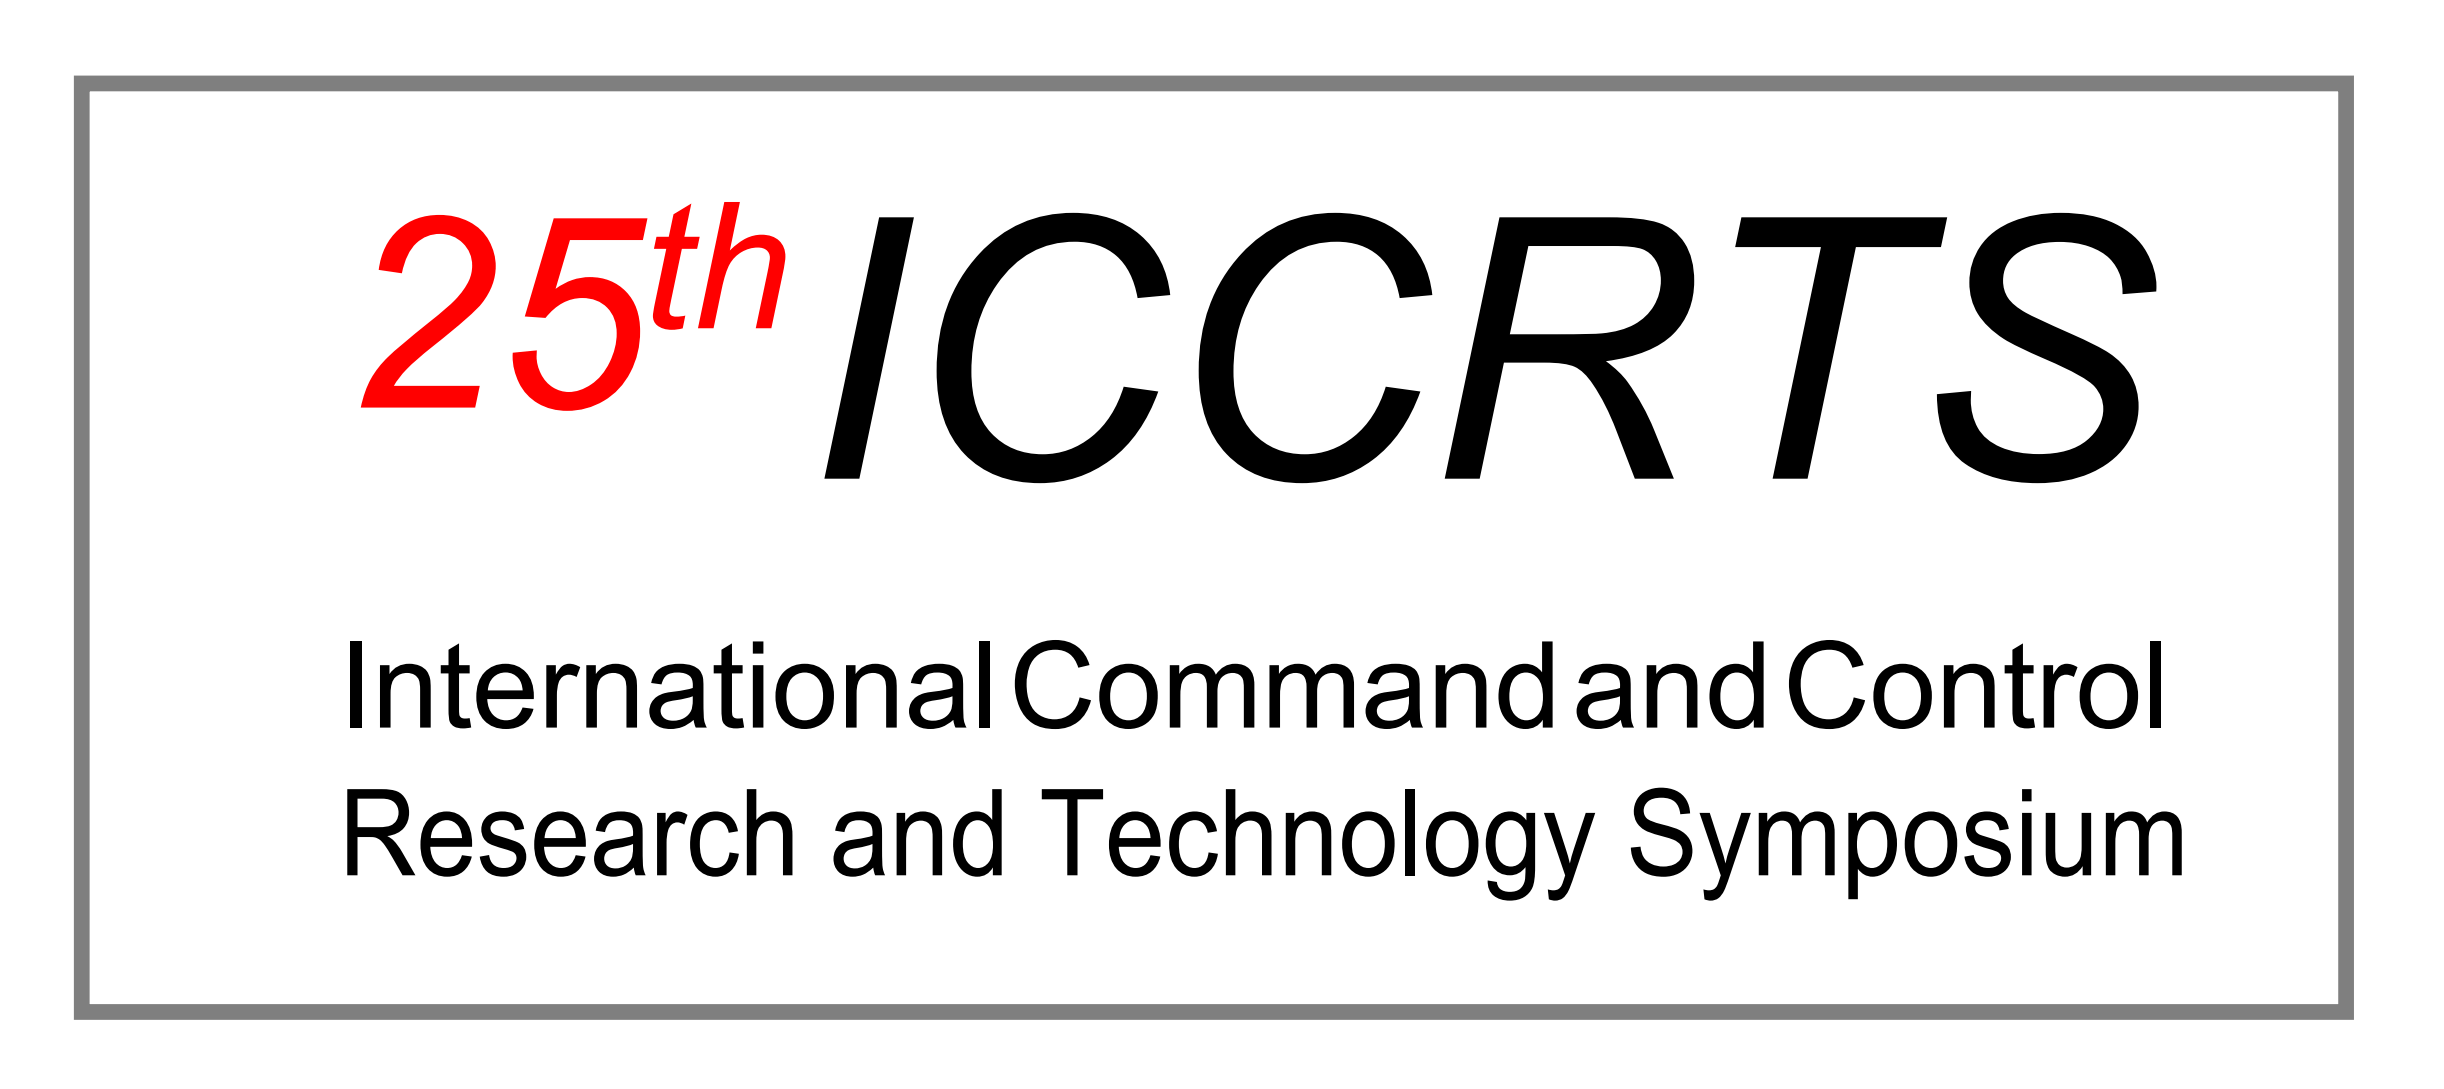 25th ICCRTS - International Command and Control Research and Technology Symposium